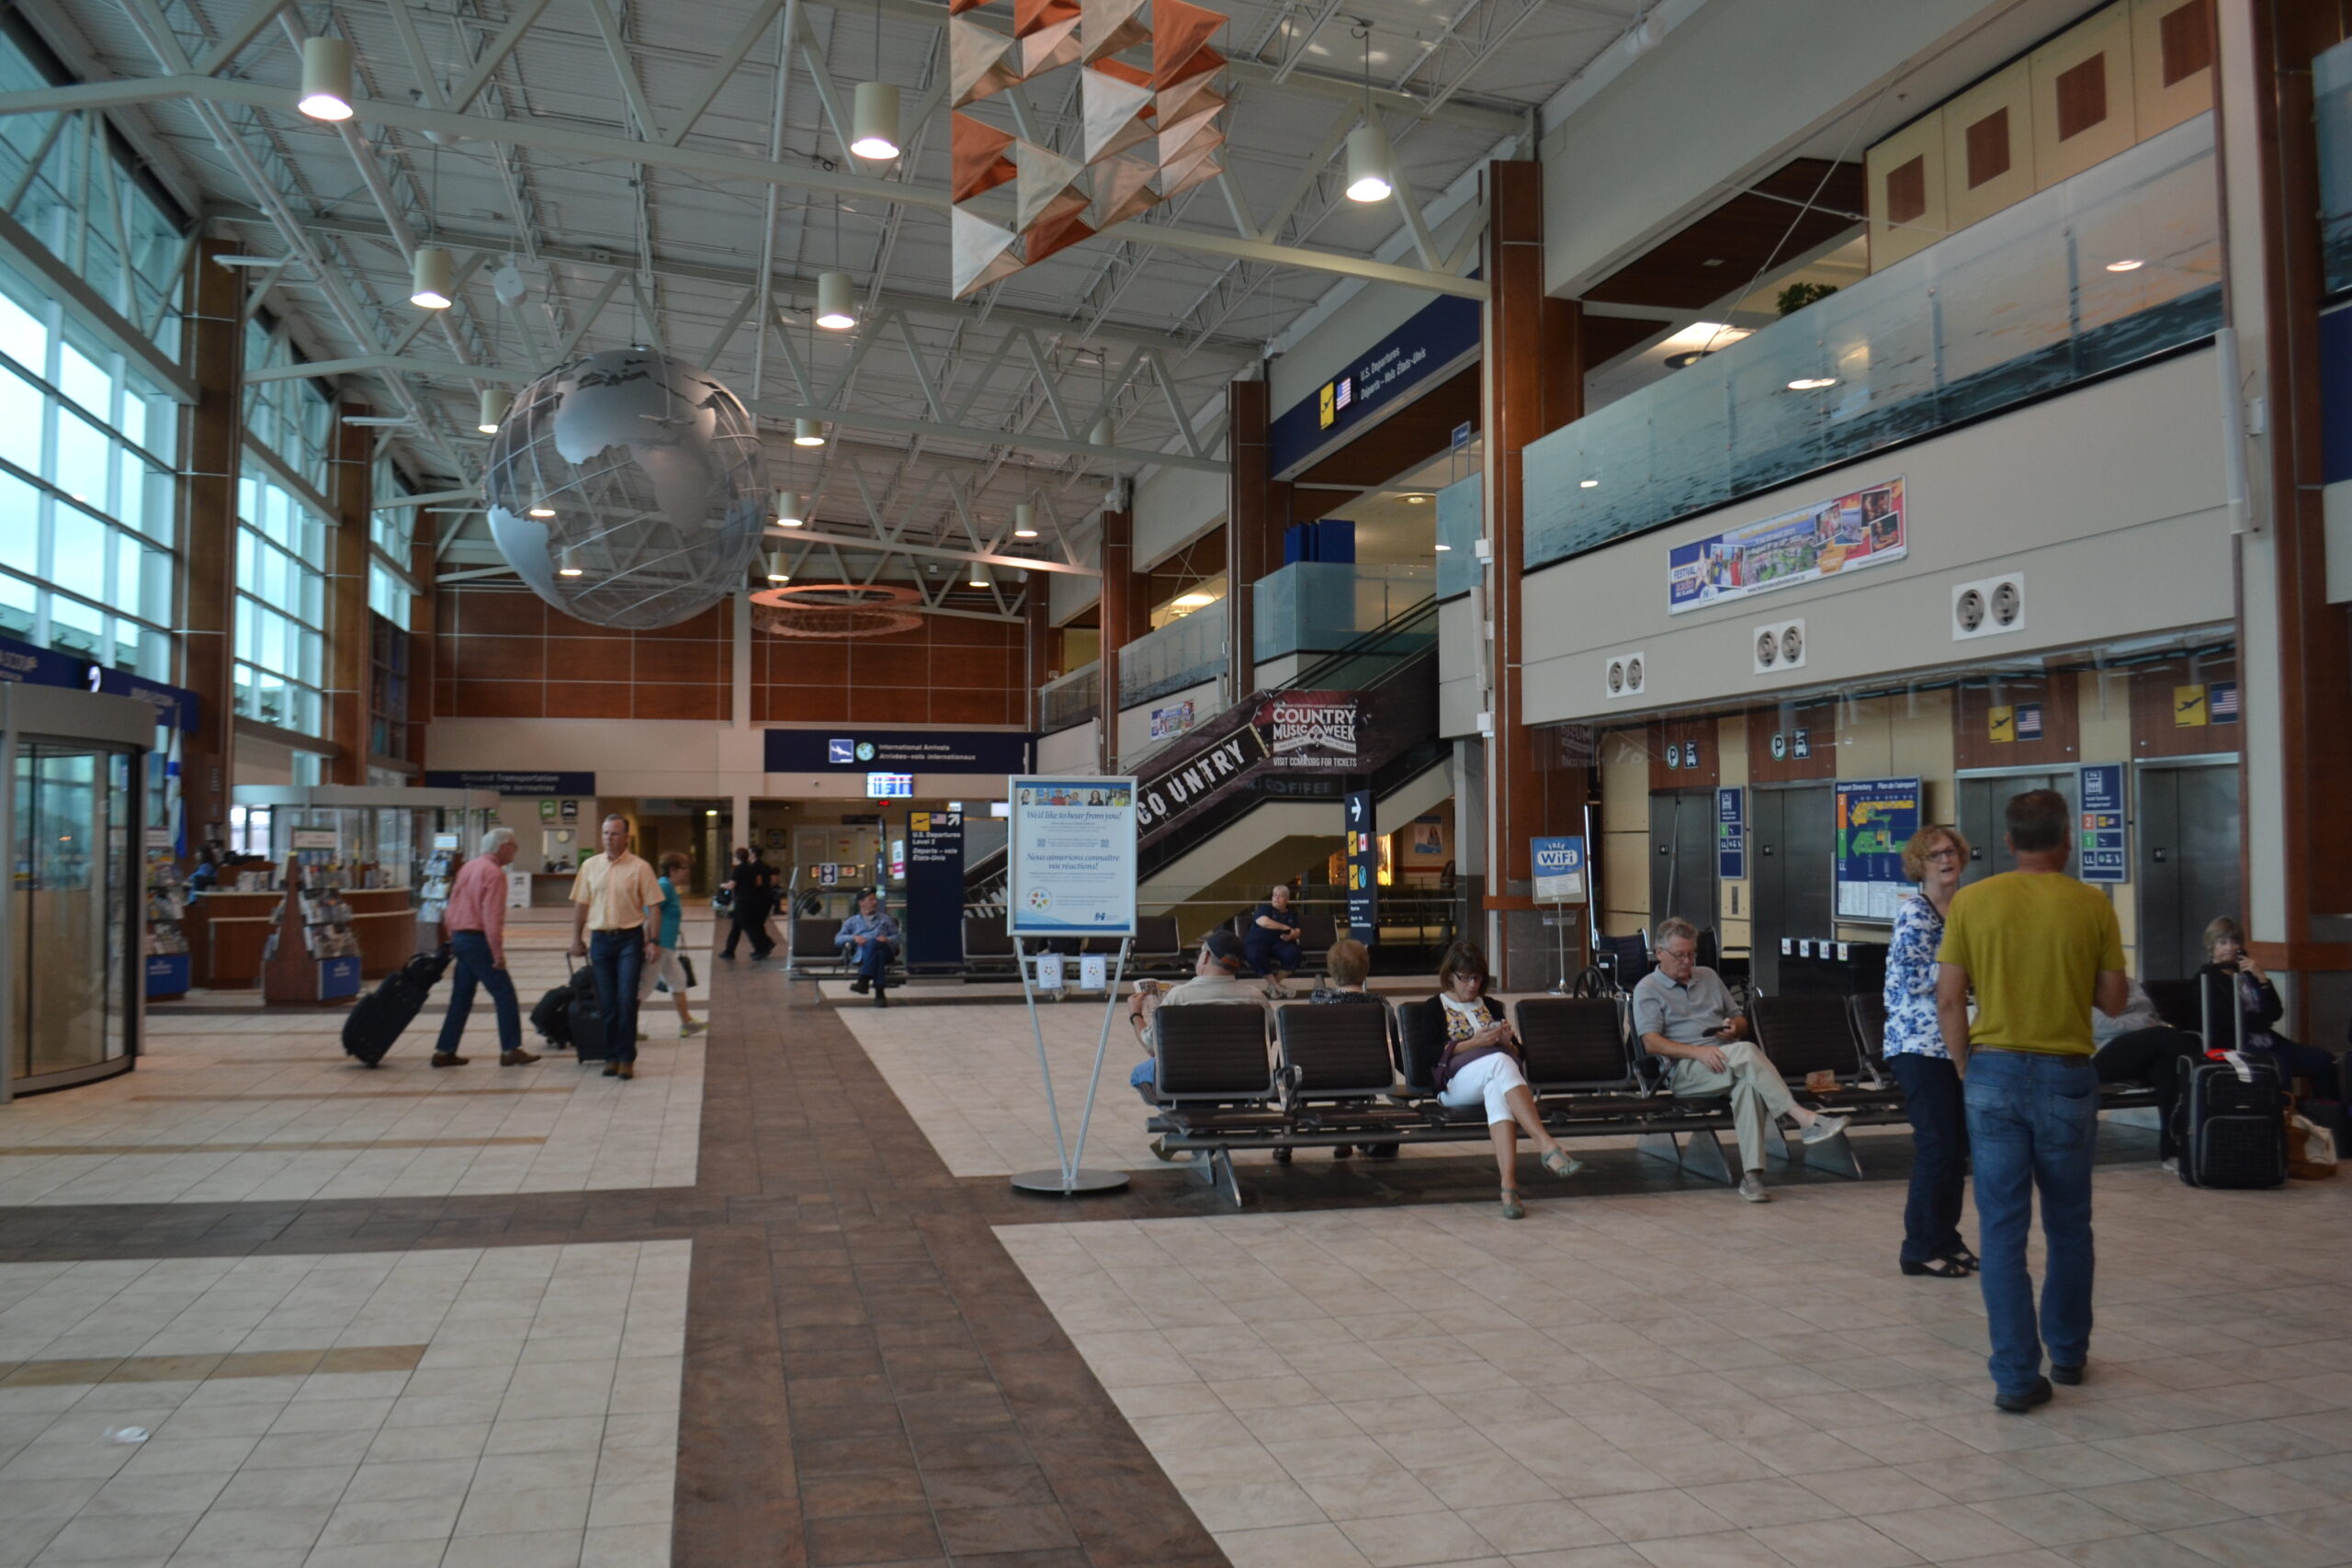 <p>Like many mid-size airports, food and beverage options are lacking. Additionally, there is room to improve the management of terminal congestion. These factors would further enhance the strengths of Halifax Stanfield — namely, its friendly staff and clean facilities.</p><p>Remember to scroll up and hit the ‘Follow’ button to keep up with the newest stories from Seattle Travel on your Microsoft Start feed or MSN homepage!</p>